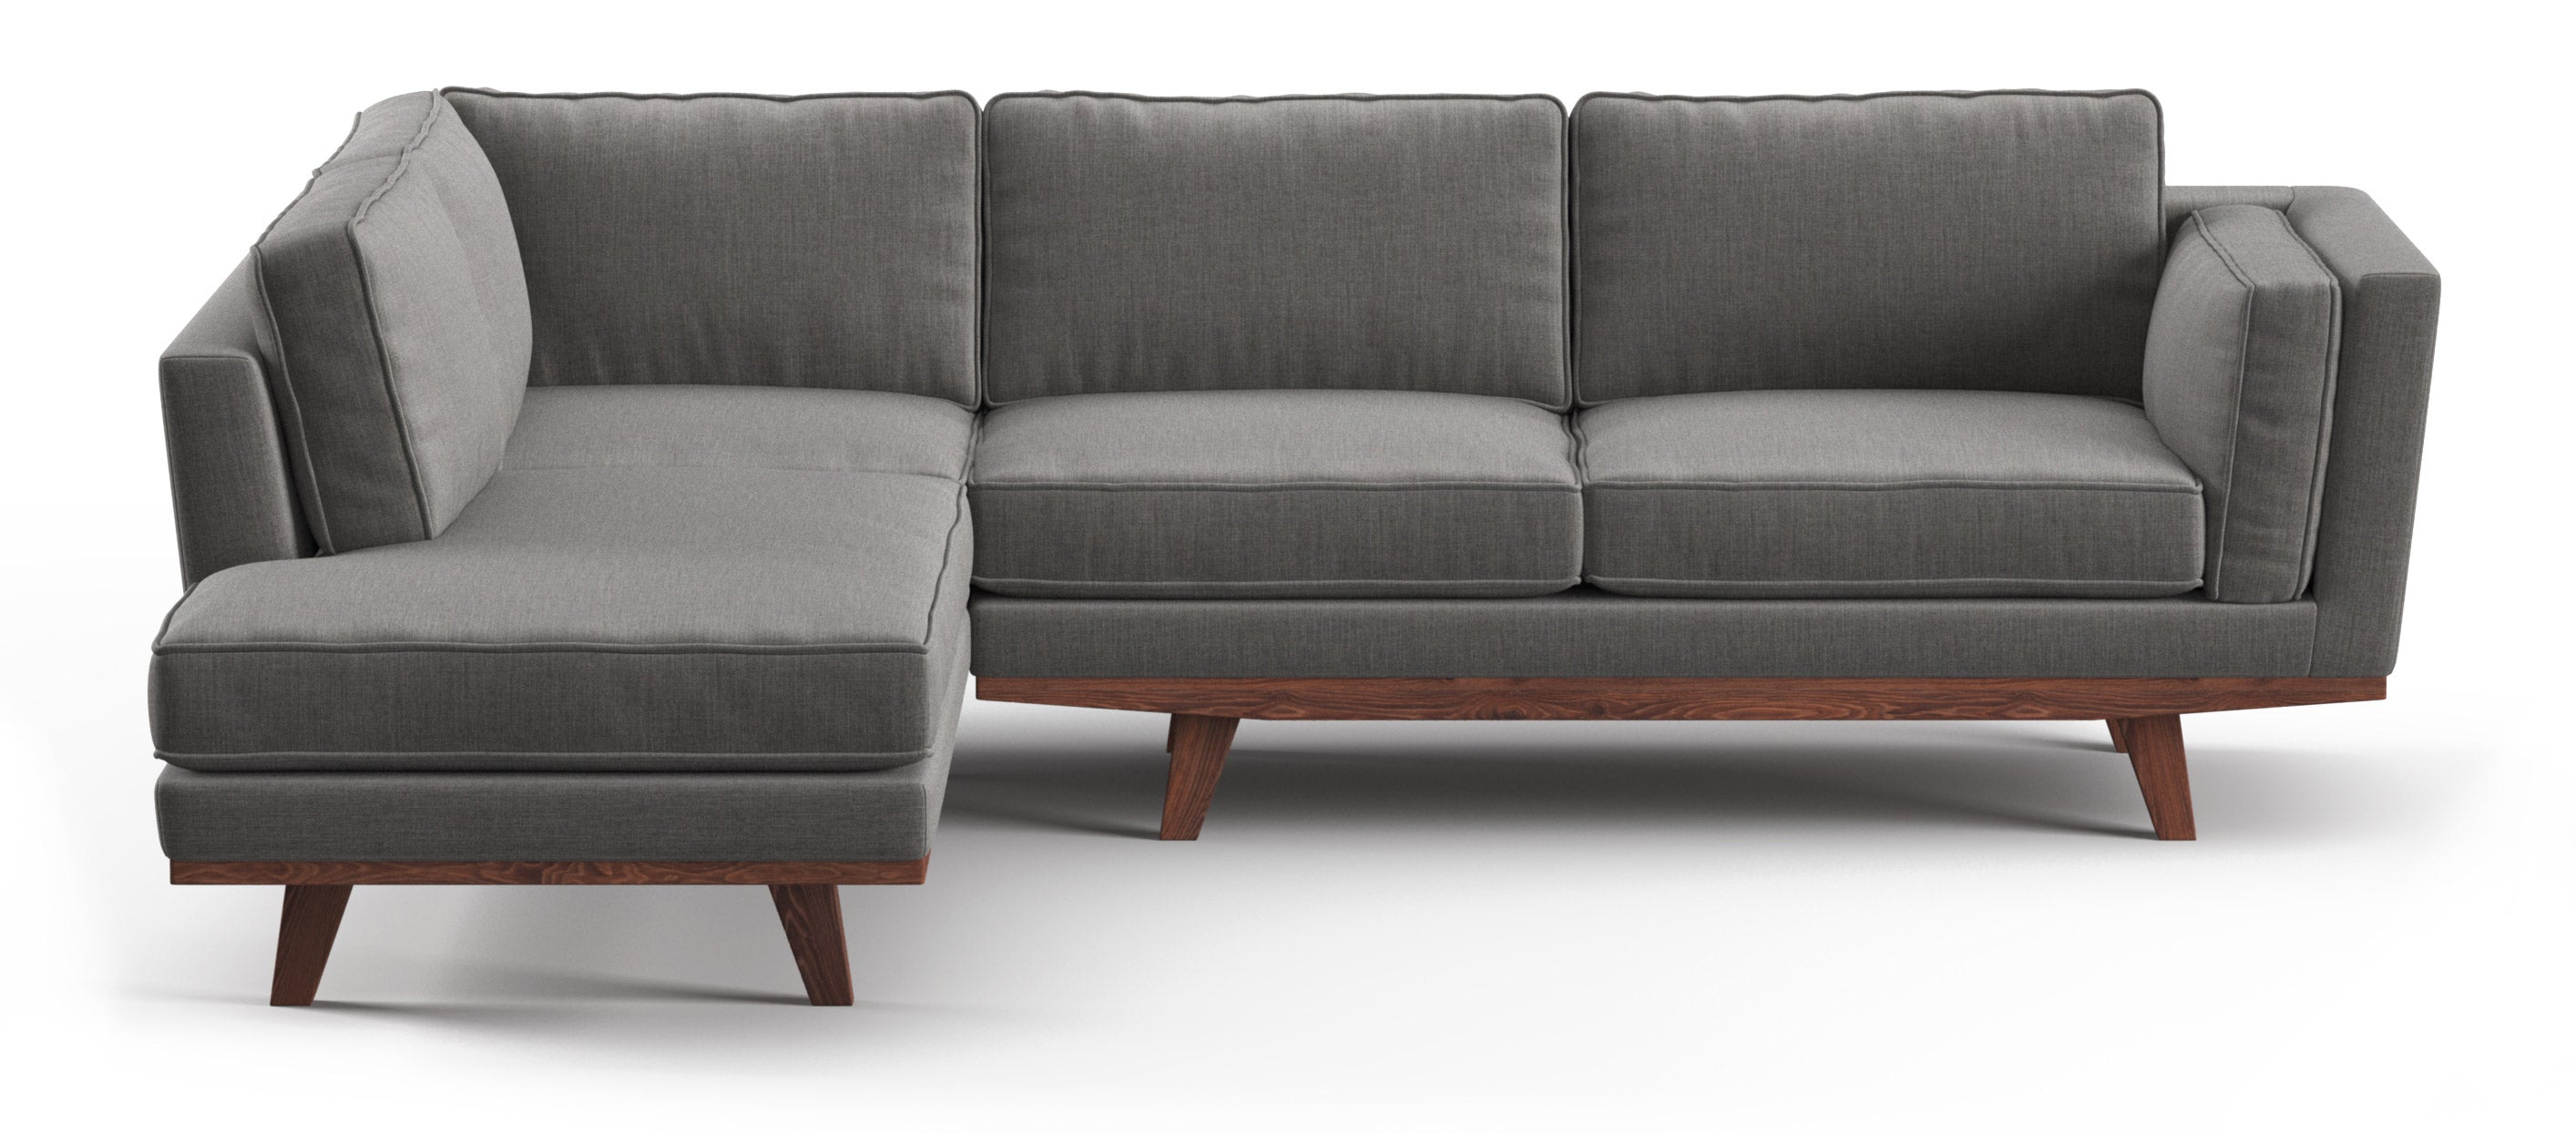 Bumper Left Sectional in Smart Aluminum fabric with Walnut base